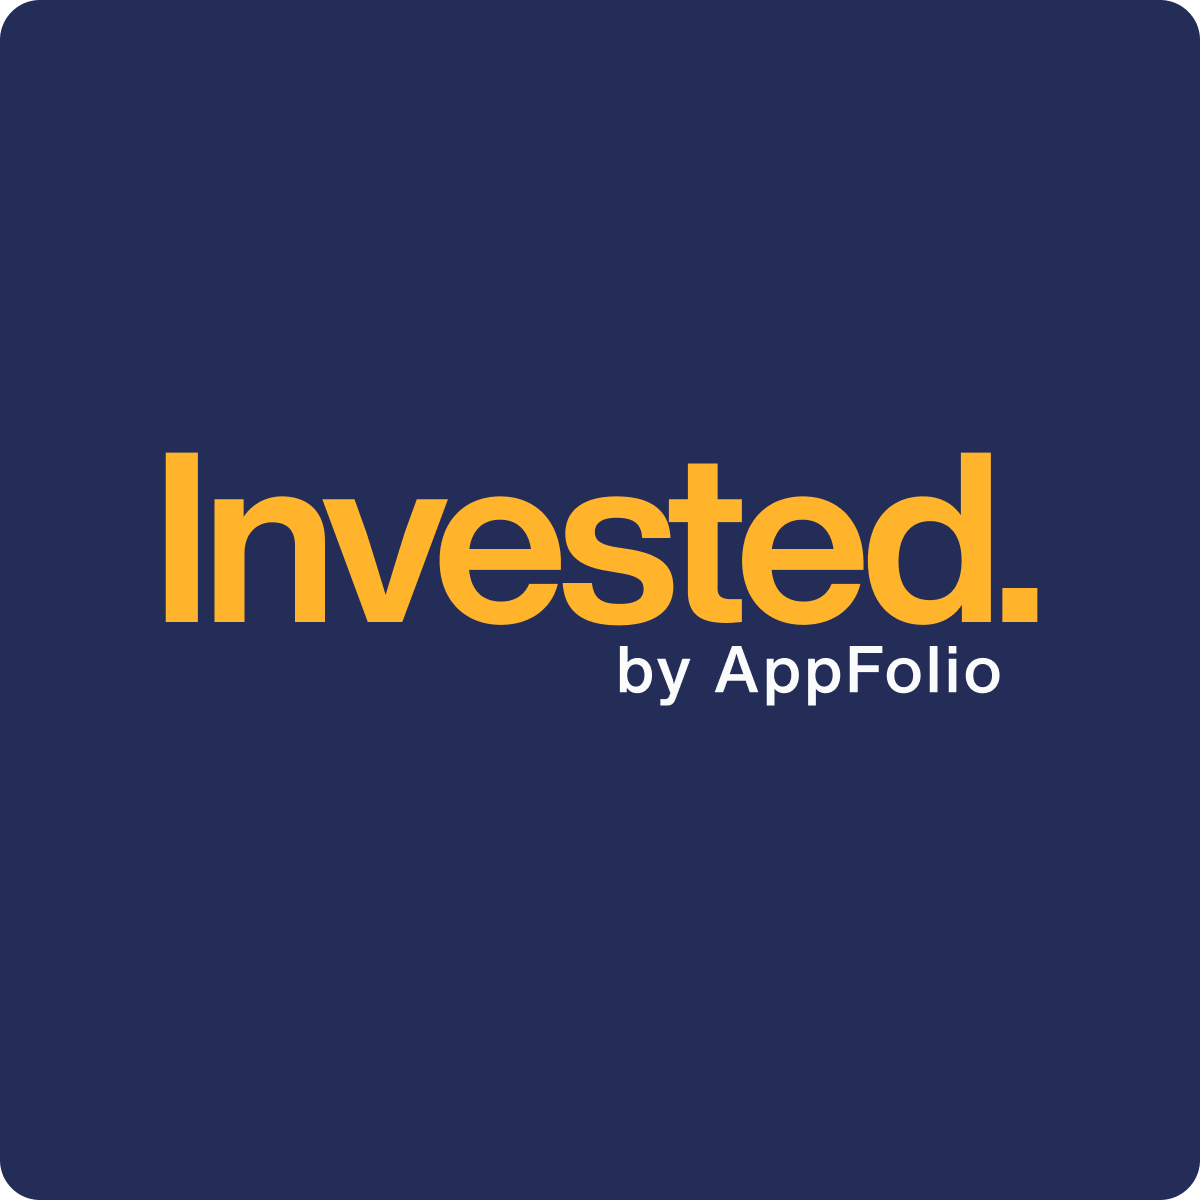 Invested. by AppFolio